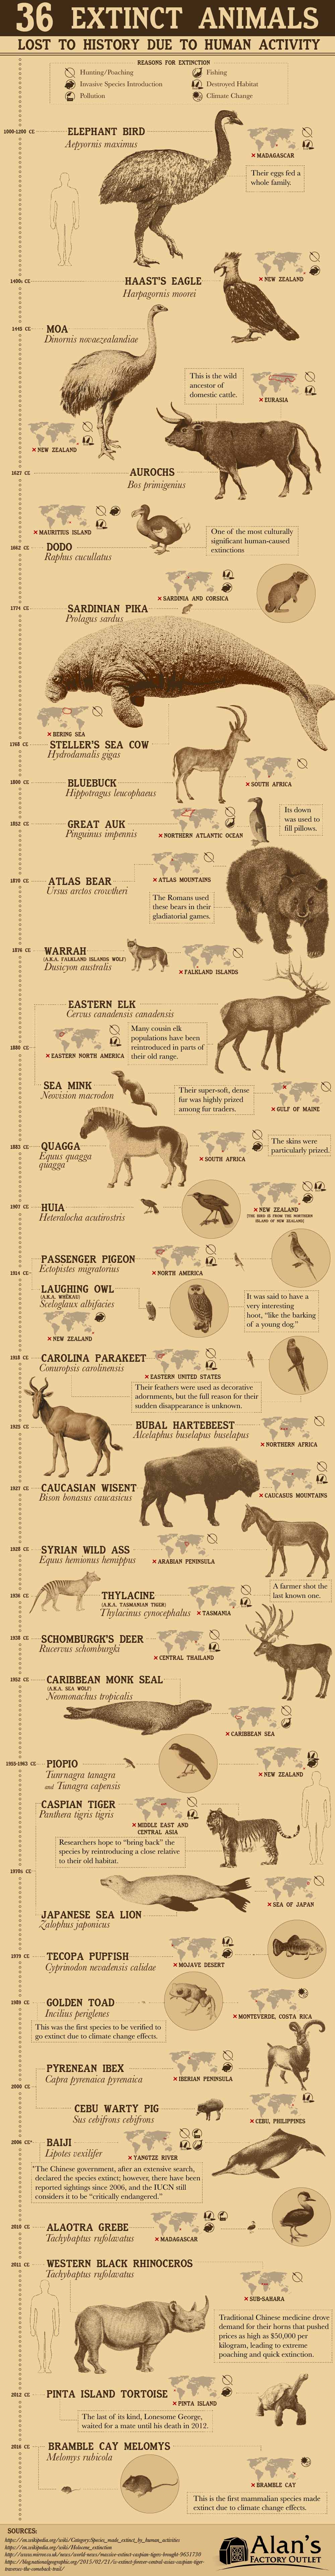 36 Extinct Animals Lost to History Due to Human Activity [Infographic]